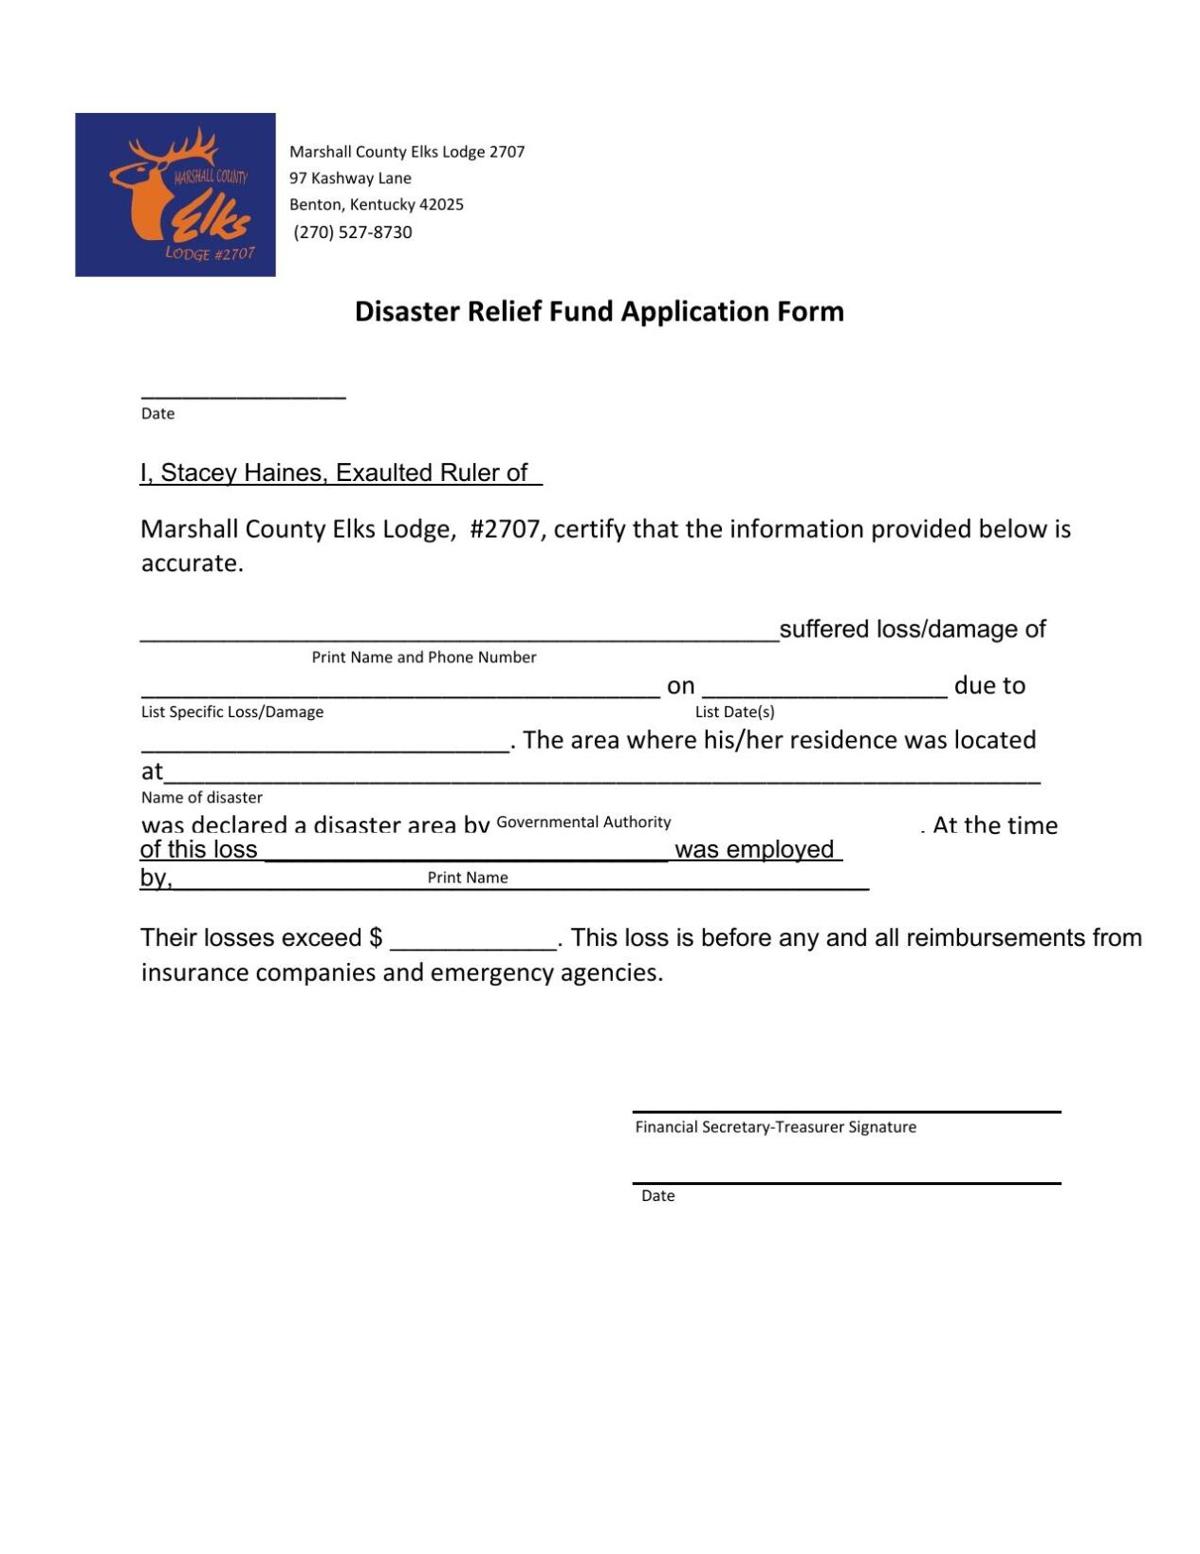 relief fund application form.pdf